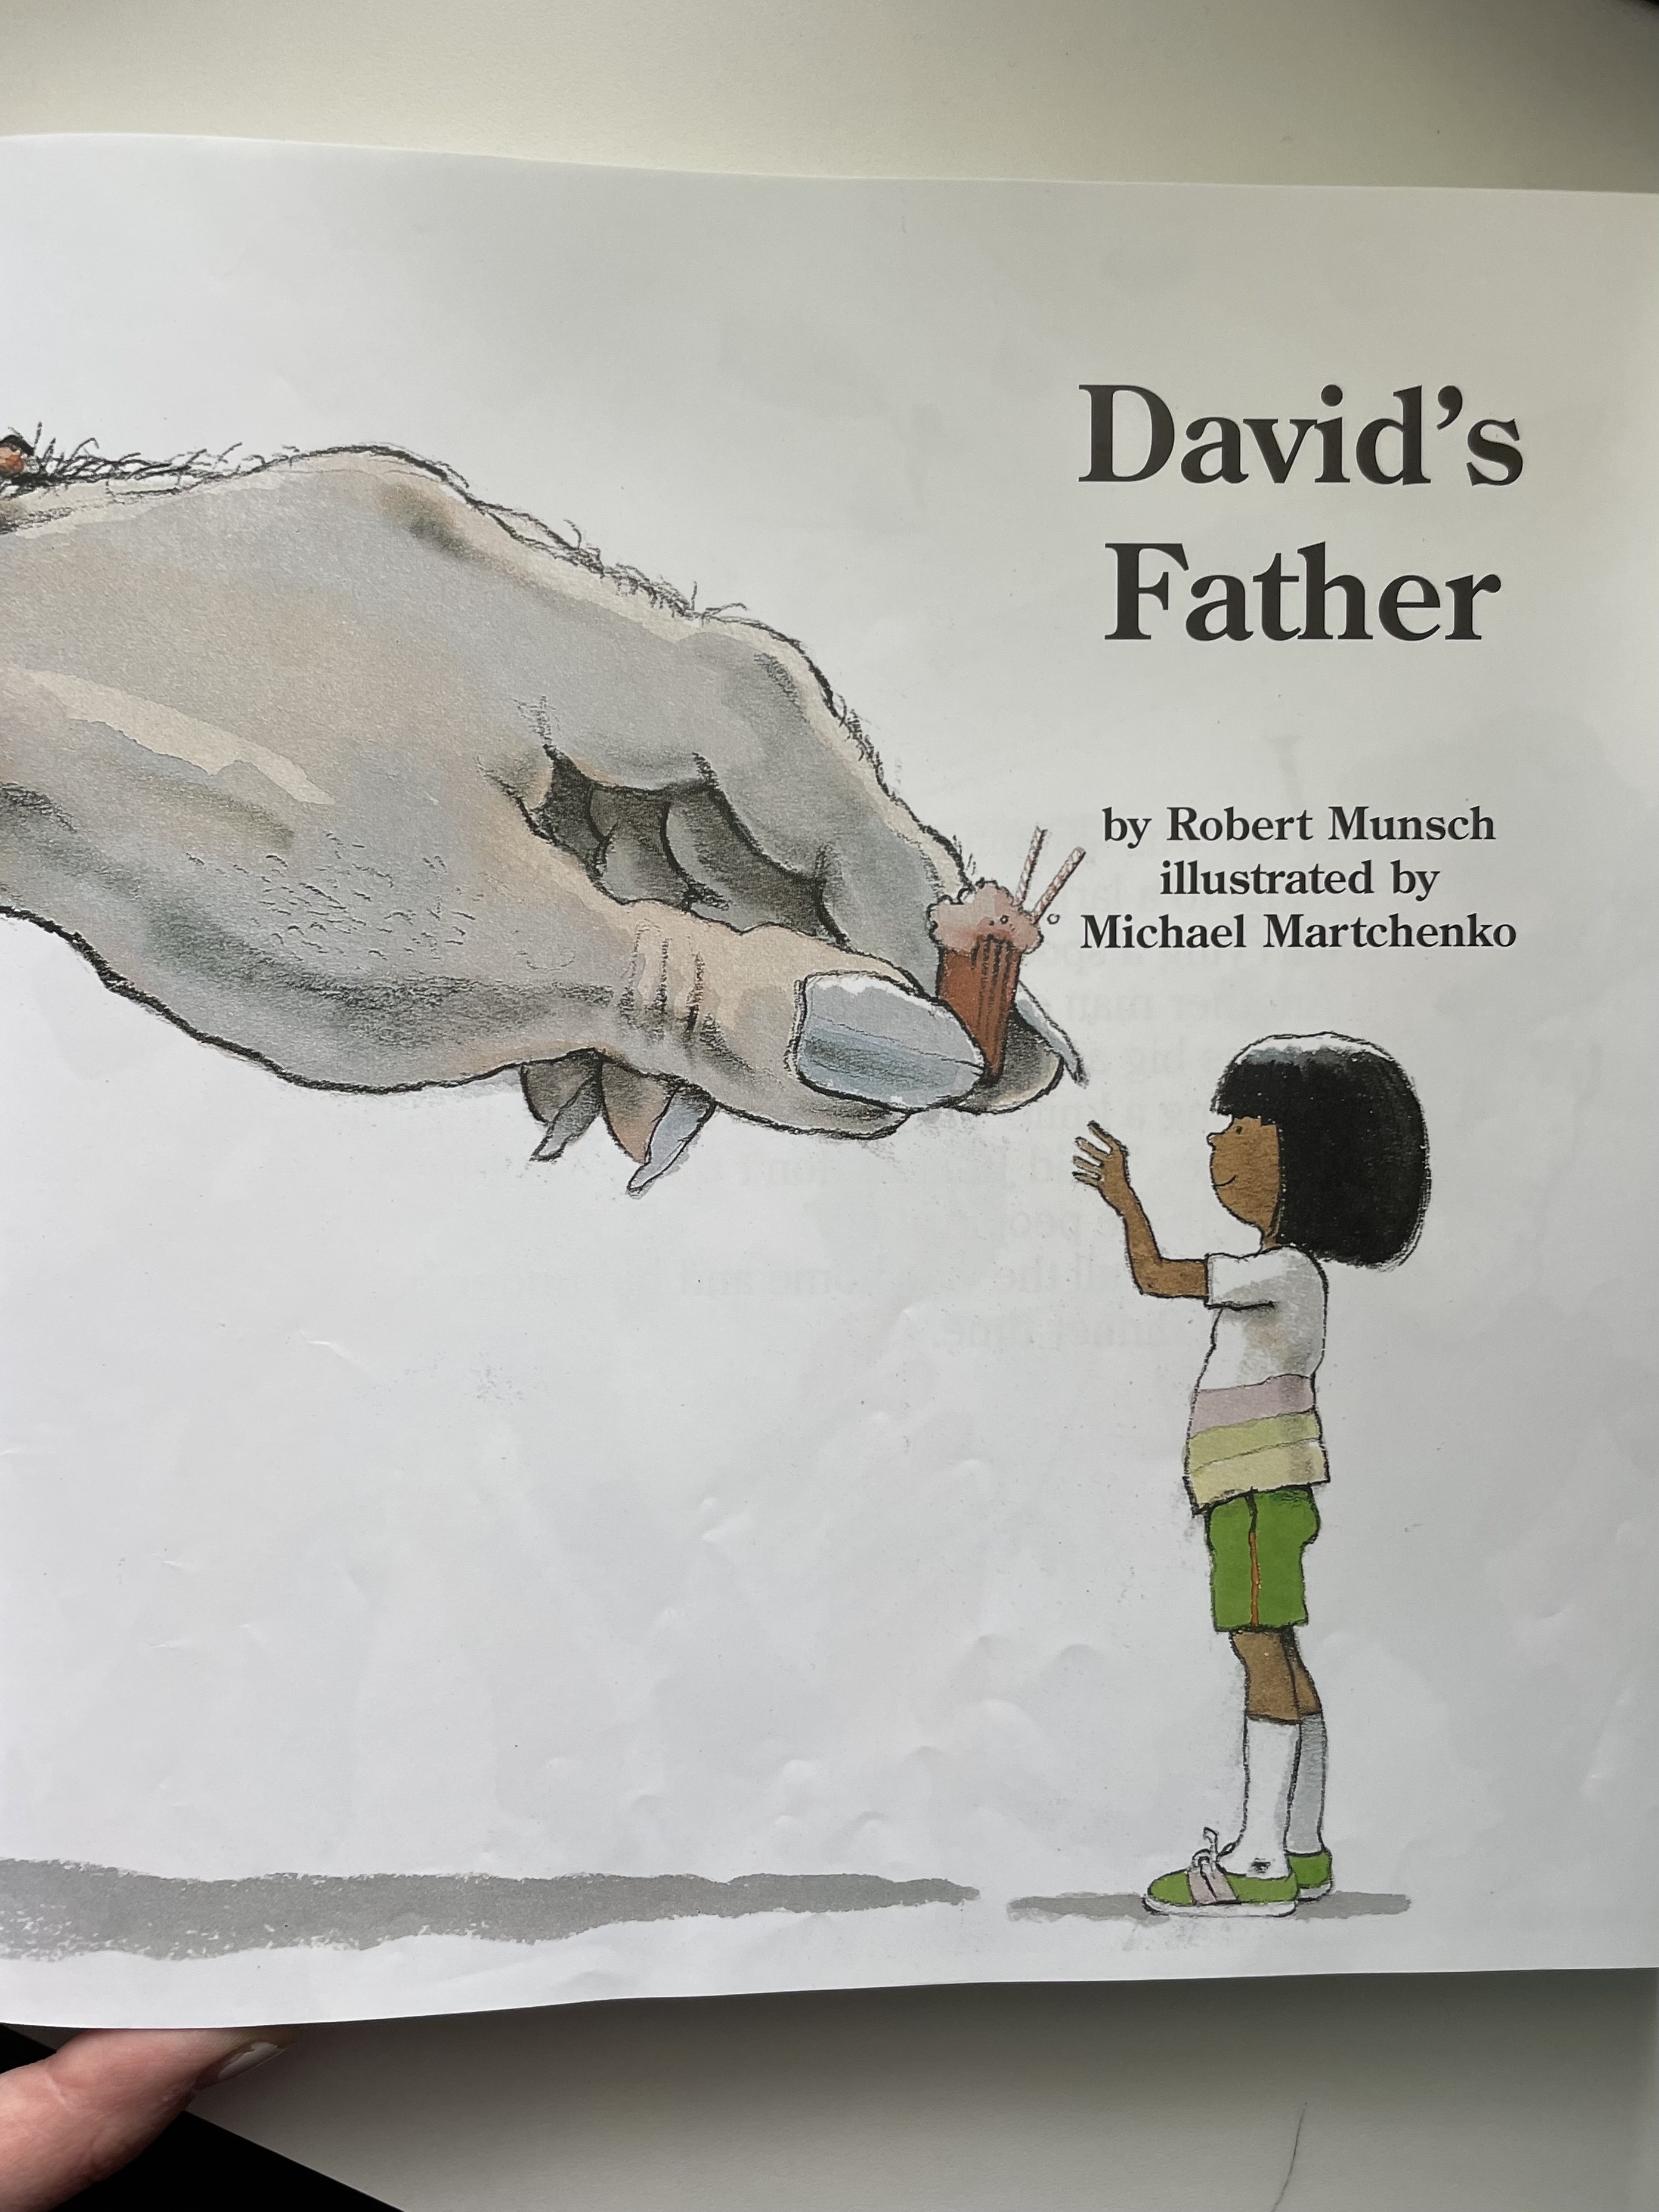 Book cover with the title &quot;David&#x27;s Father&quot; showing a child facing a giant illustrated elephant. Written by Robert Munsch and illustrated by Michael Martchenko